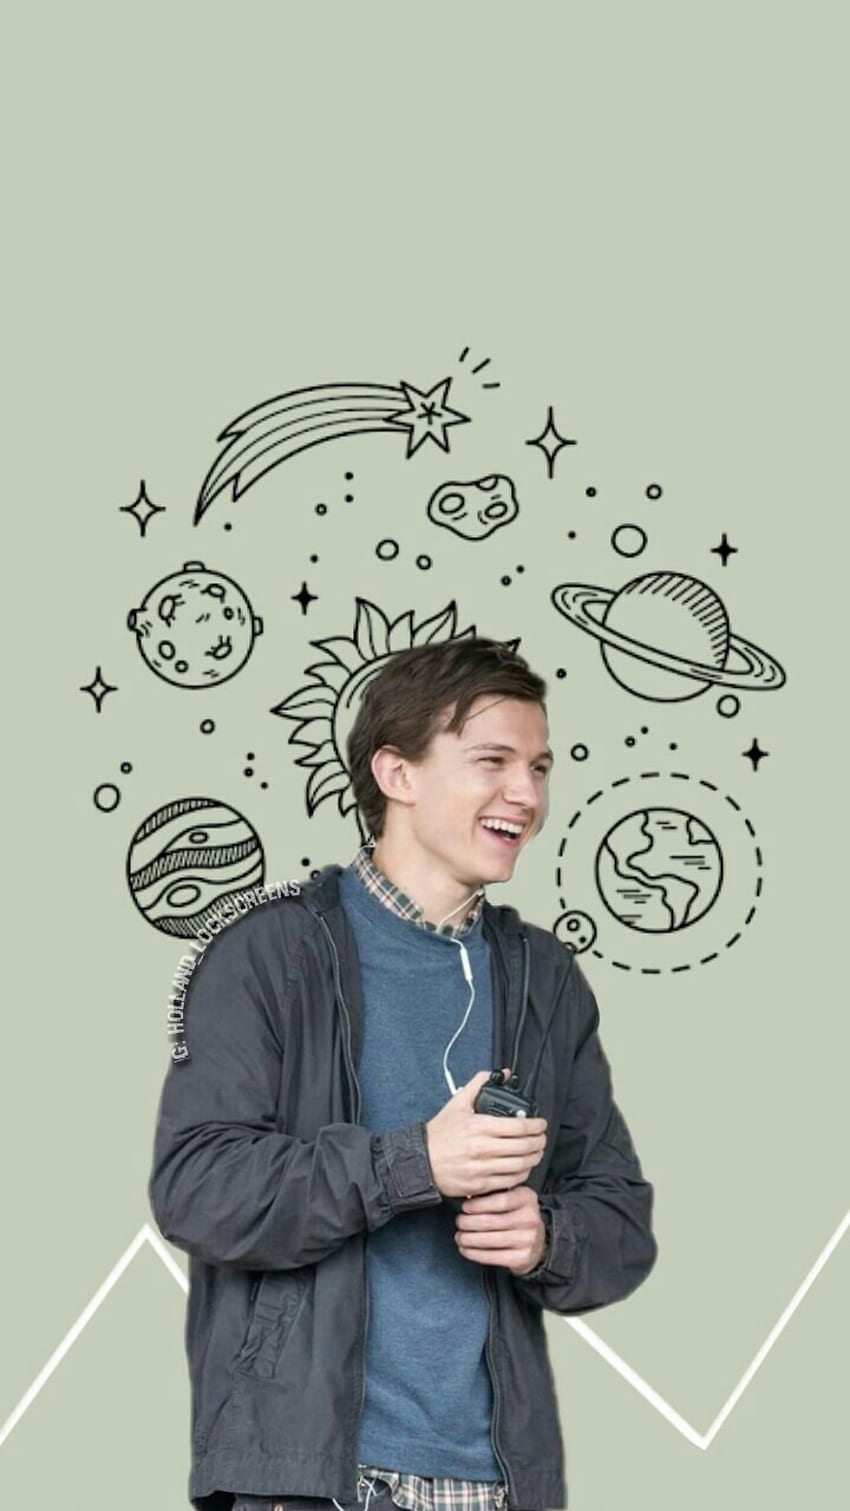 A man laughing with planets around him - Tom Holland